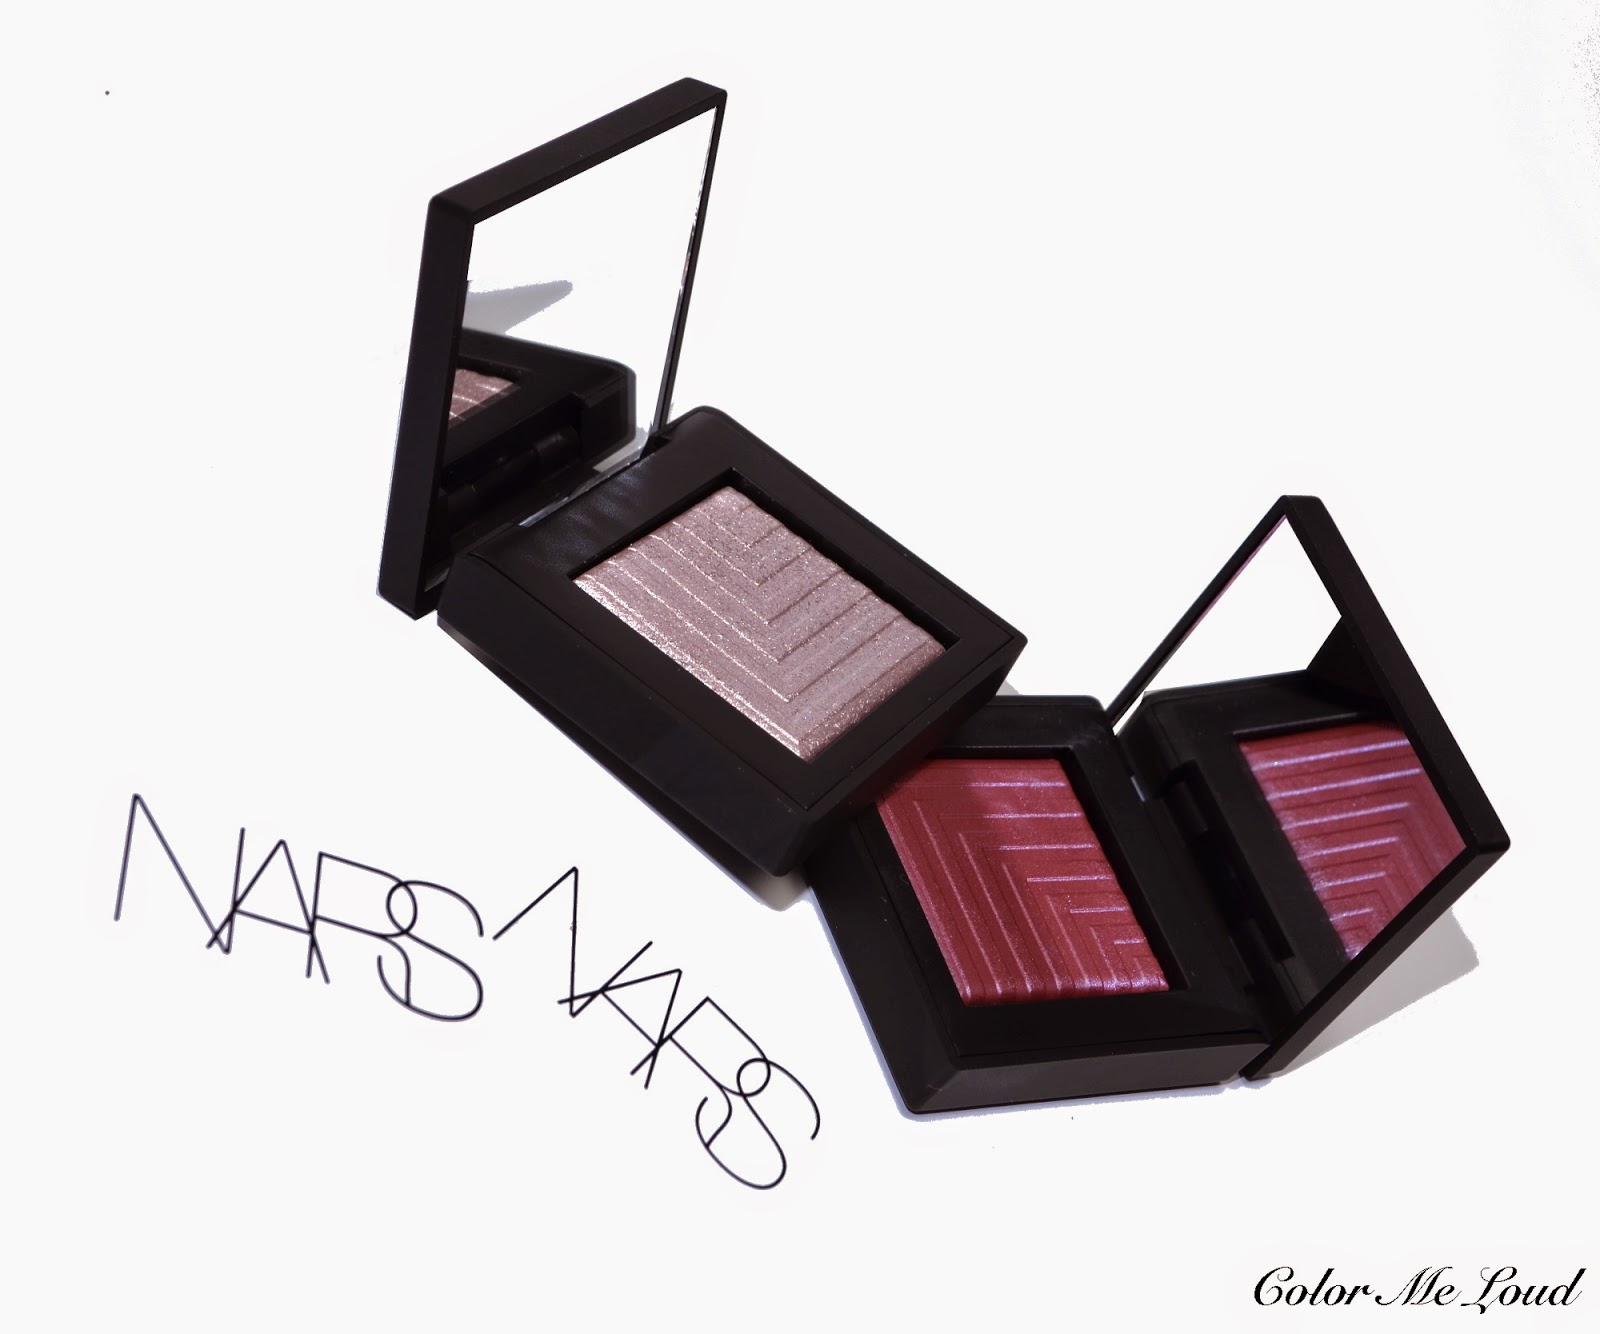 Nars Dual Intensity Eye Shadows in Callisto and Desdemona, Review, Swatch & FOTD